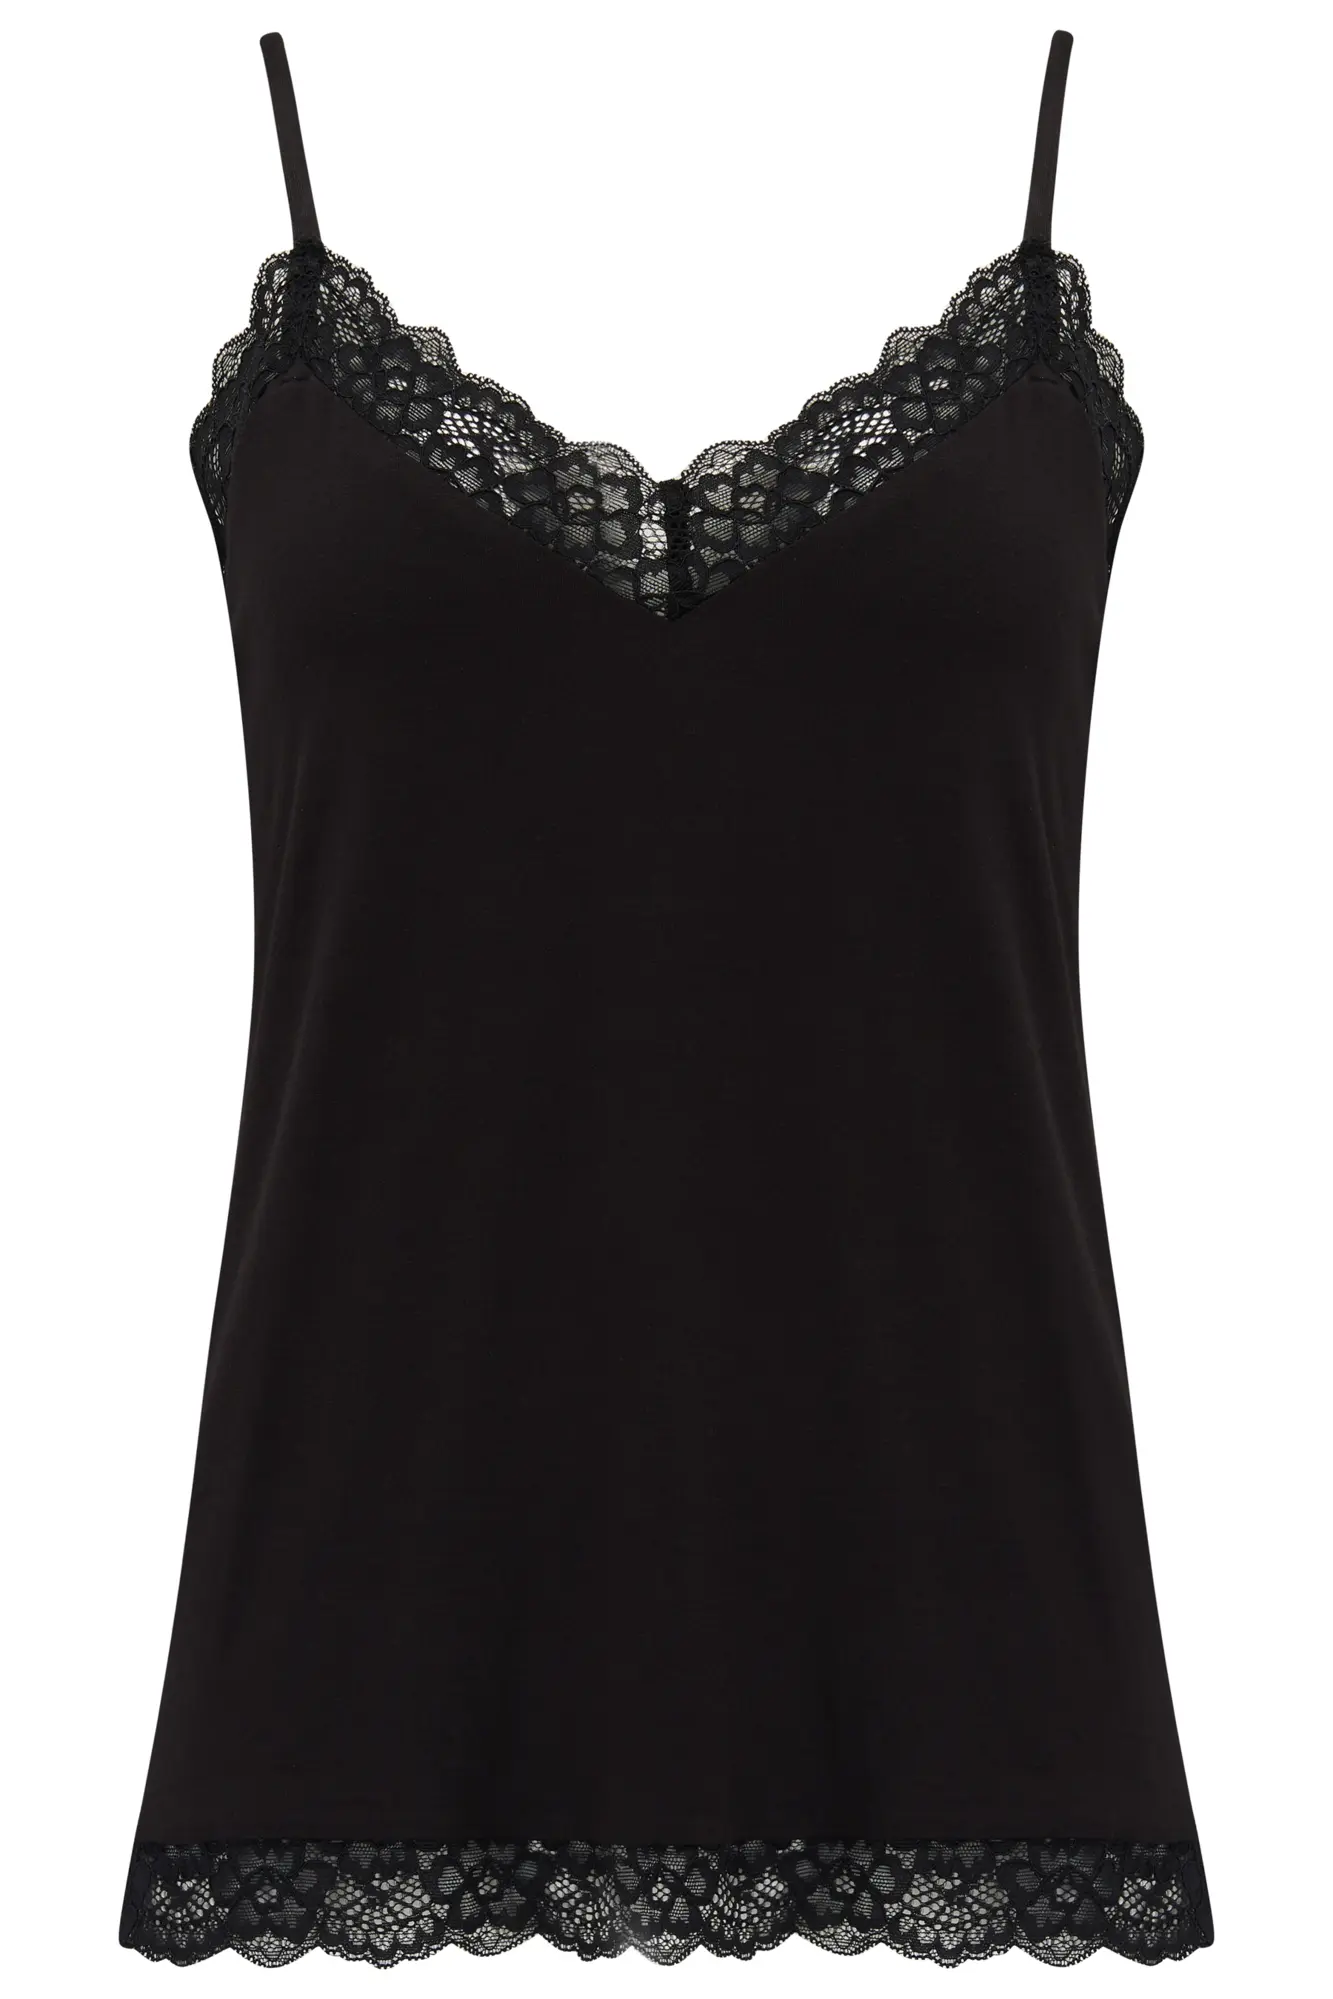 Sofa Loves Lace Hidden Support Cami in Black | Pour Moi